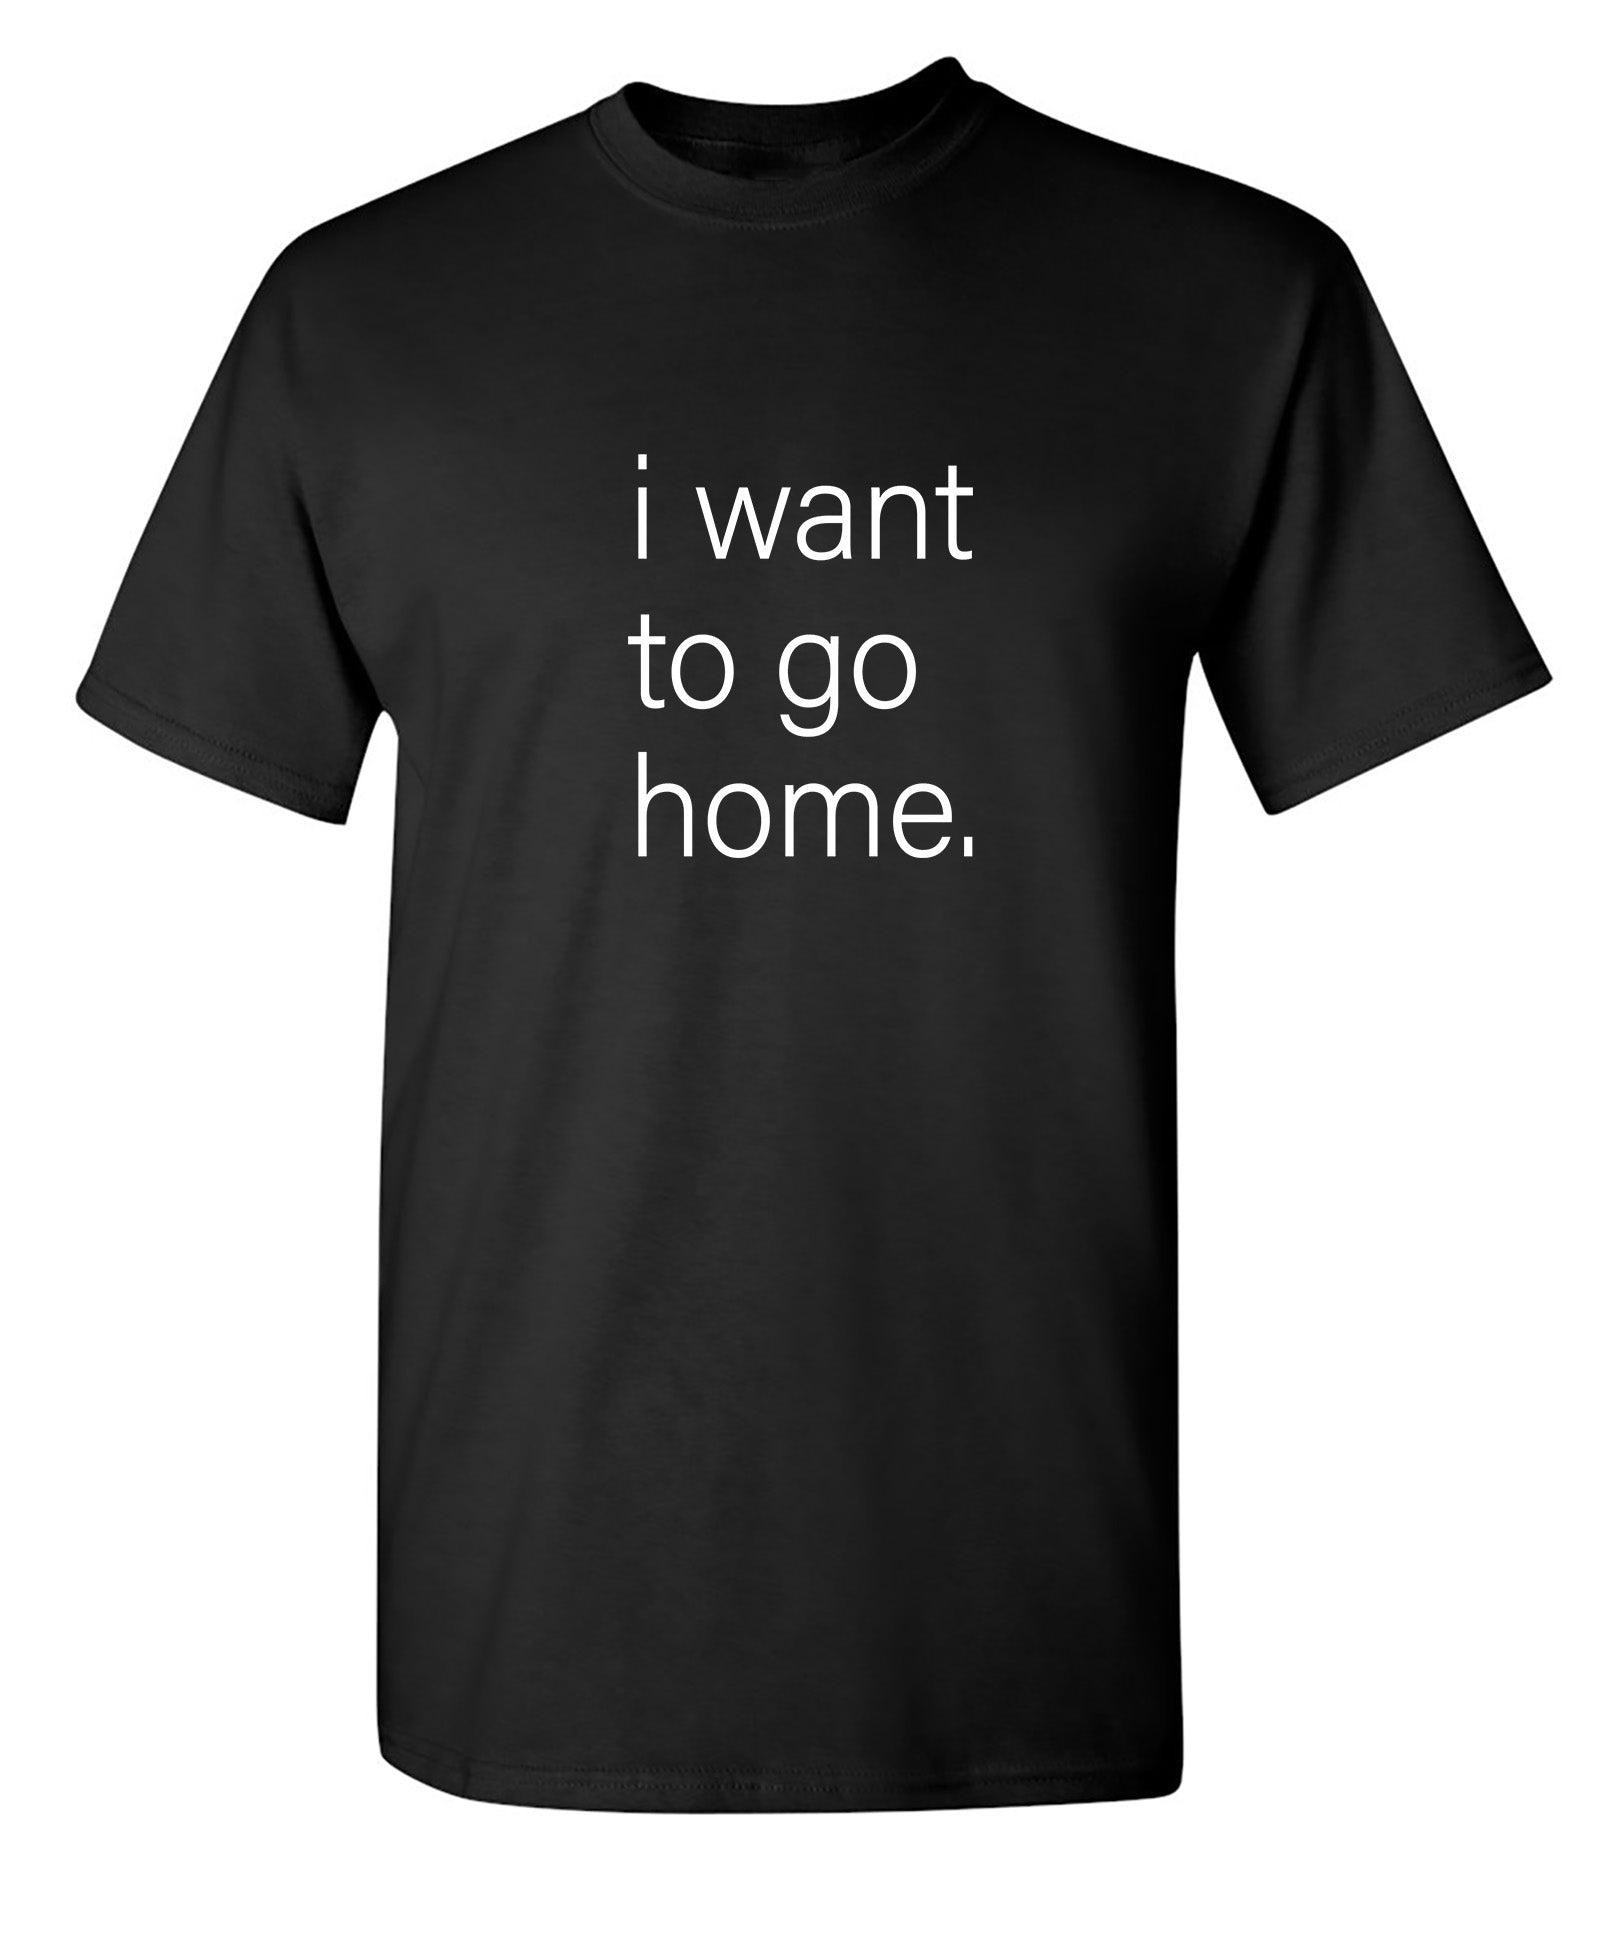 WANT HOME - Funny T Shirts & Graphic Tees